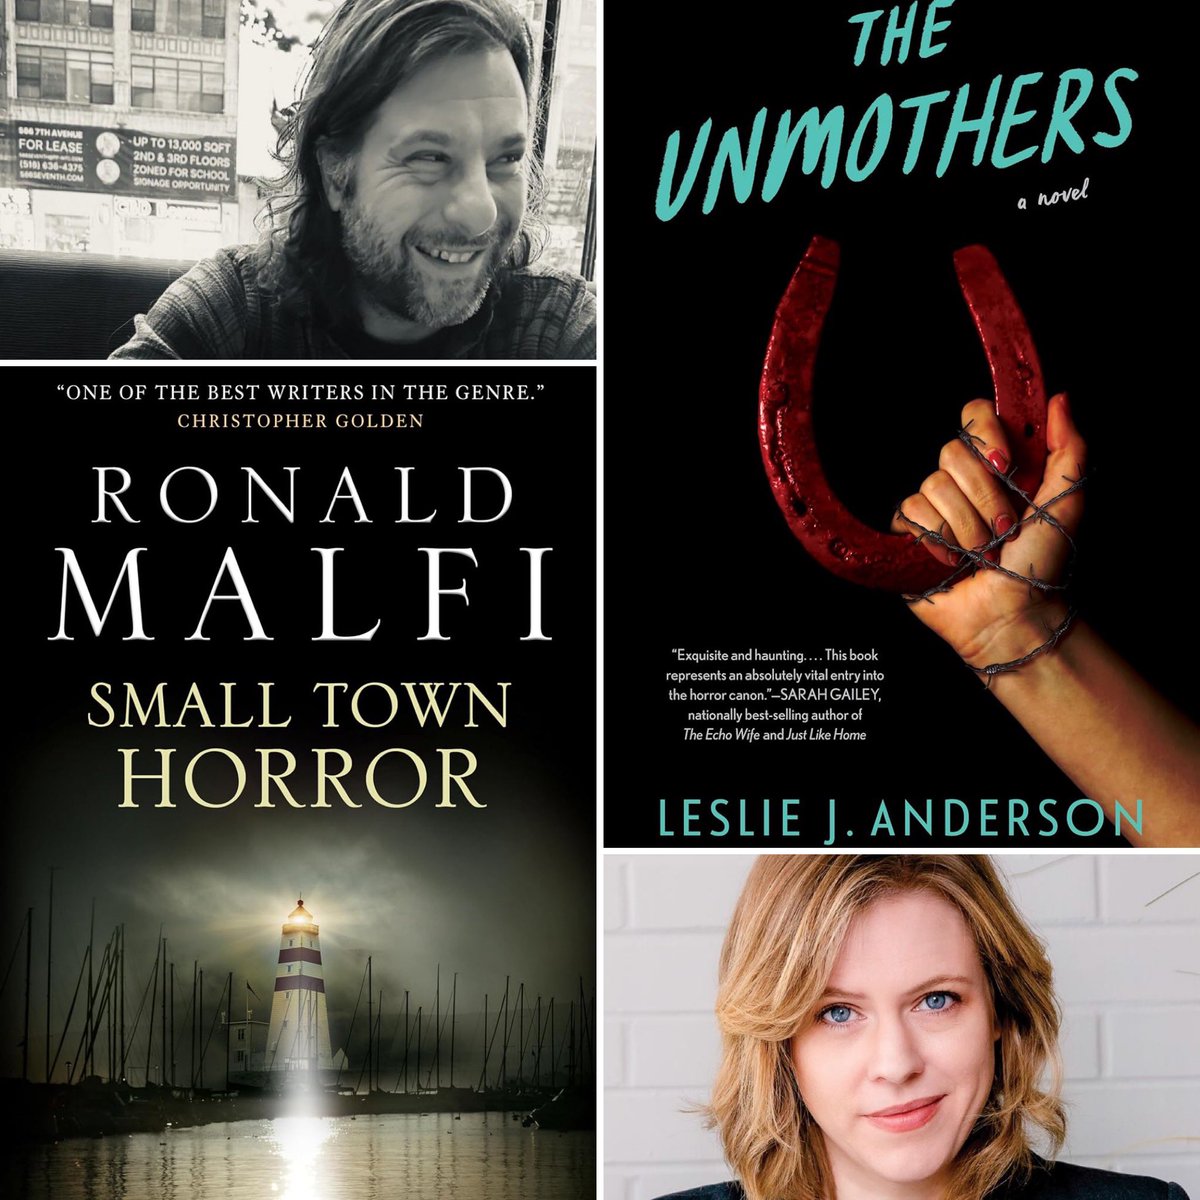 In 3 weeks, join Ronald Malfi (SMALL TOWN HORROR) & Leslie Anderson (THE UNMOTHERS) who’ll read & discuss their dark secrets that won’t stay buried. Our May session of Fearmongers will be on Wed, May 22nd at 8 PM/EST. Join us via Zoom by registering here: bit.ly/4aTpes4